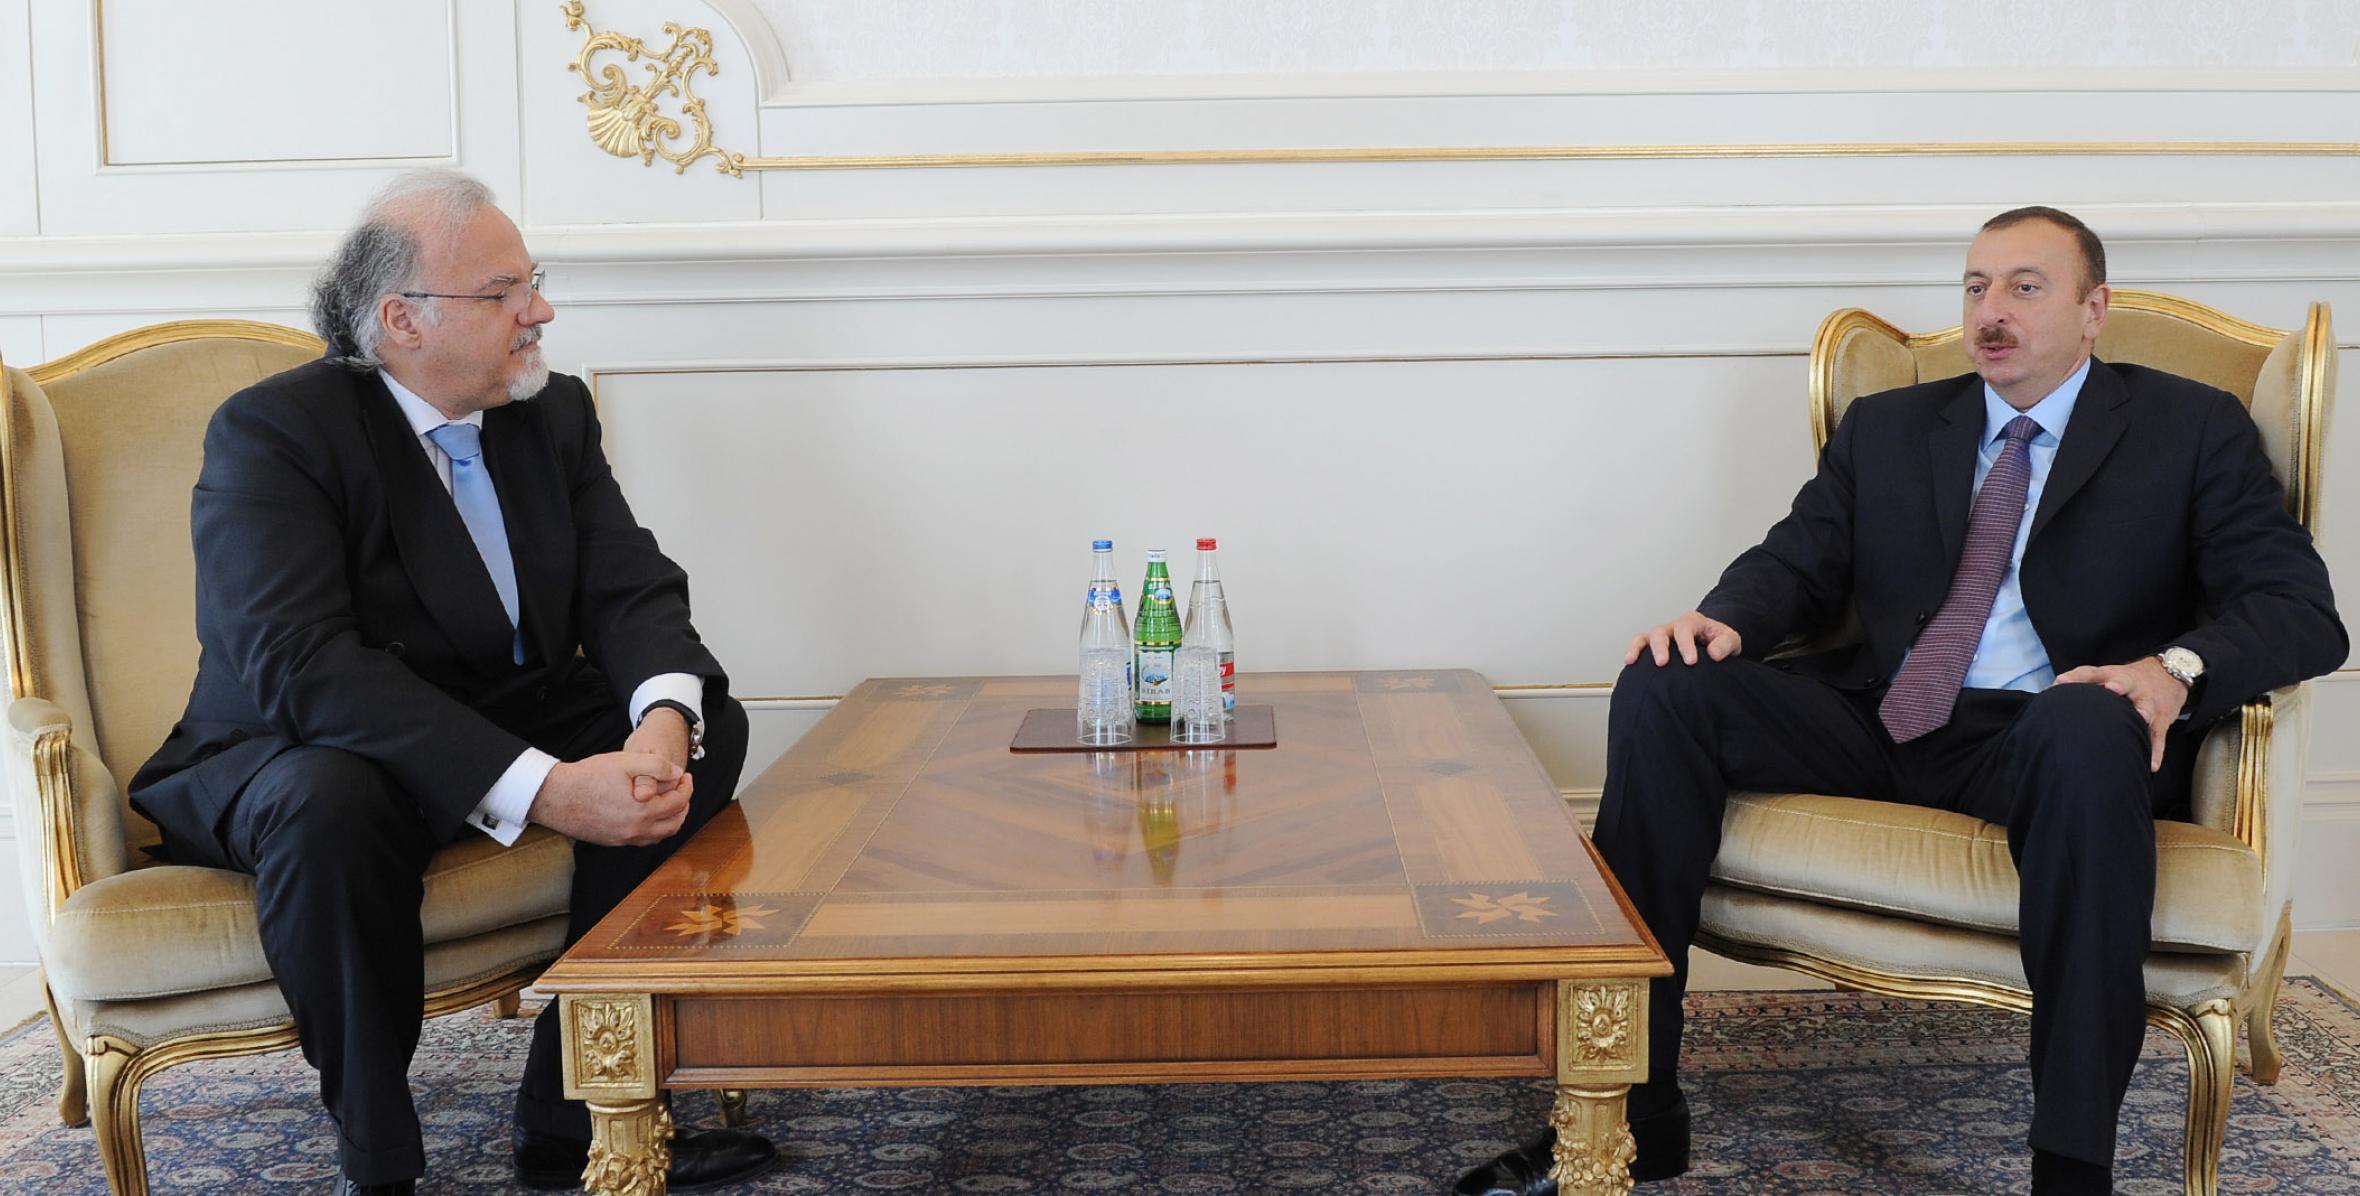 Ilham Aliyev accepted the credentials from the newly-appointed Ambassador Extraordinary and Plenipotentiary of France to Azerbaijan